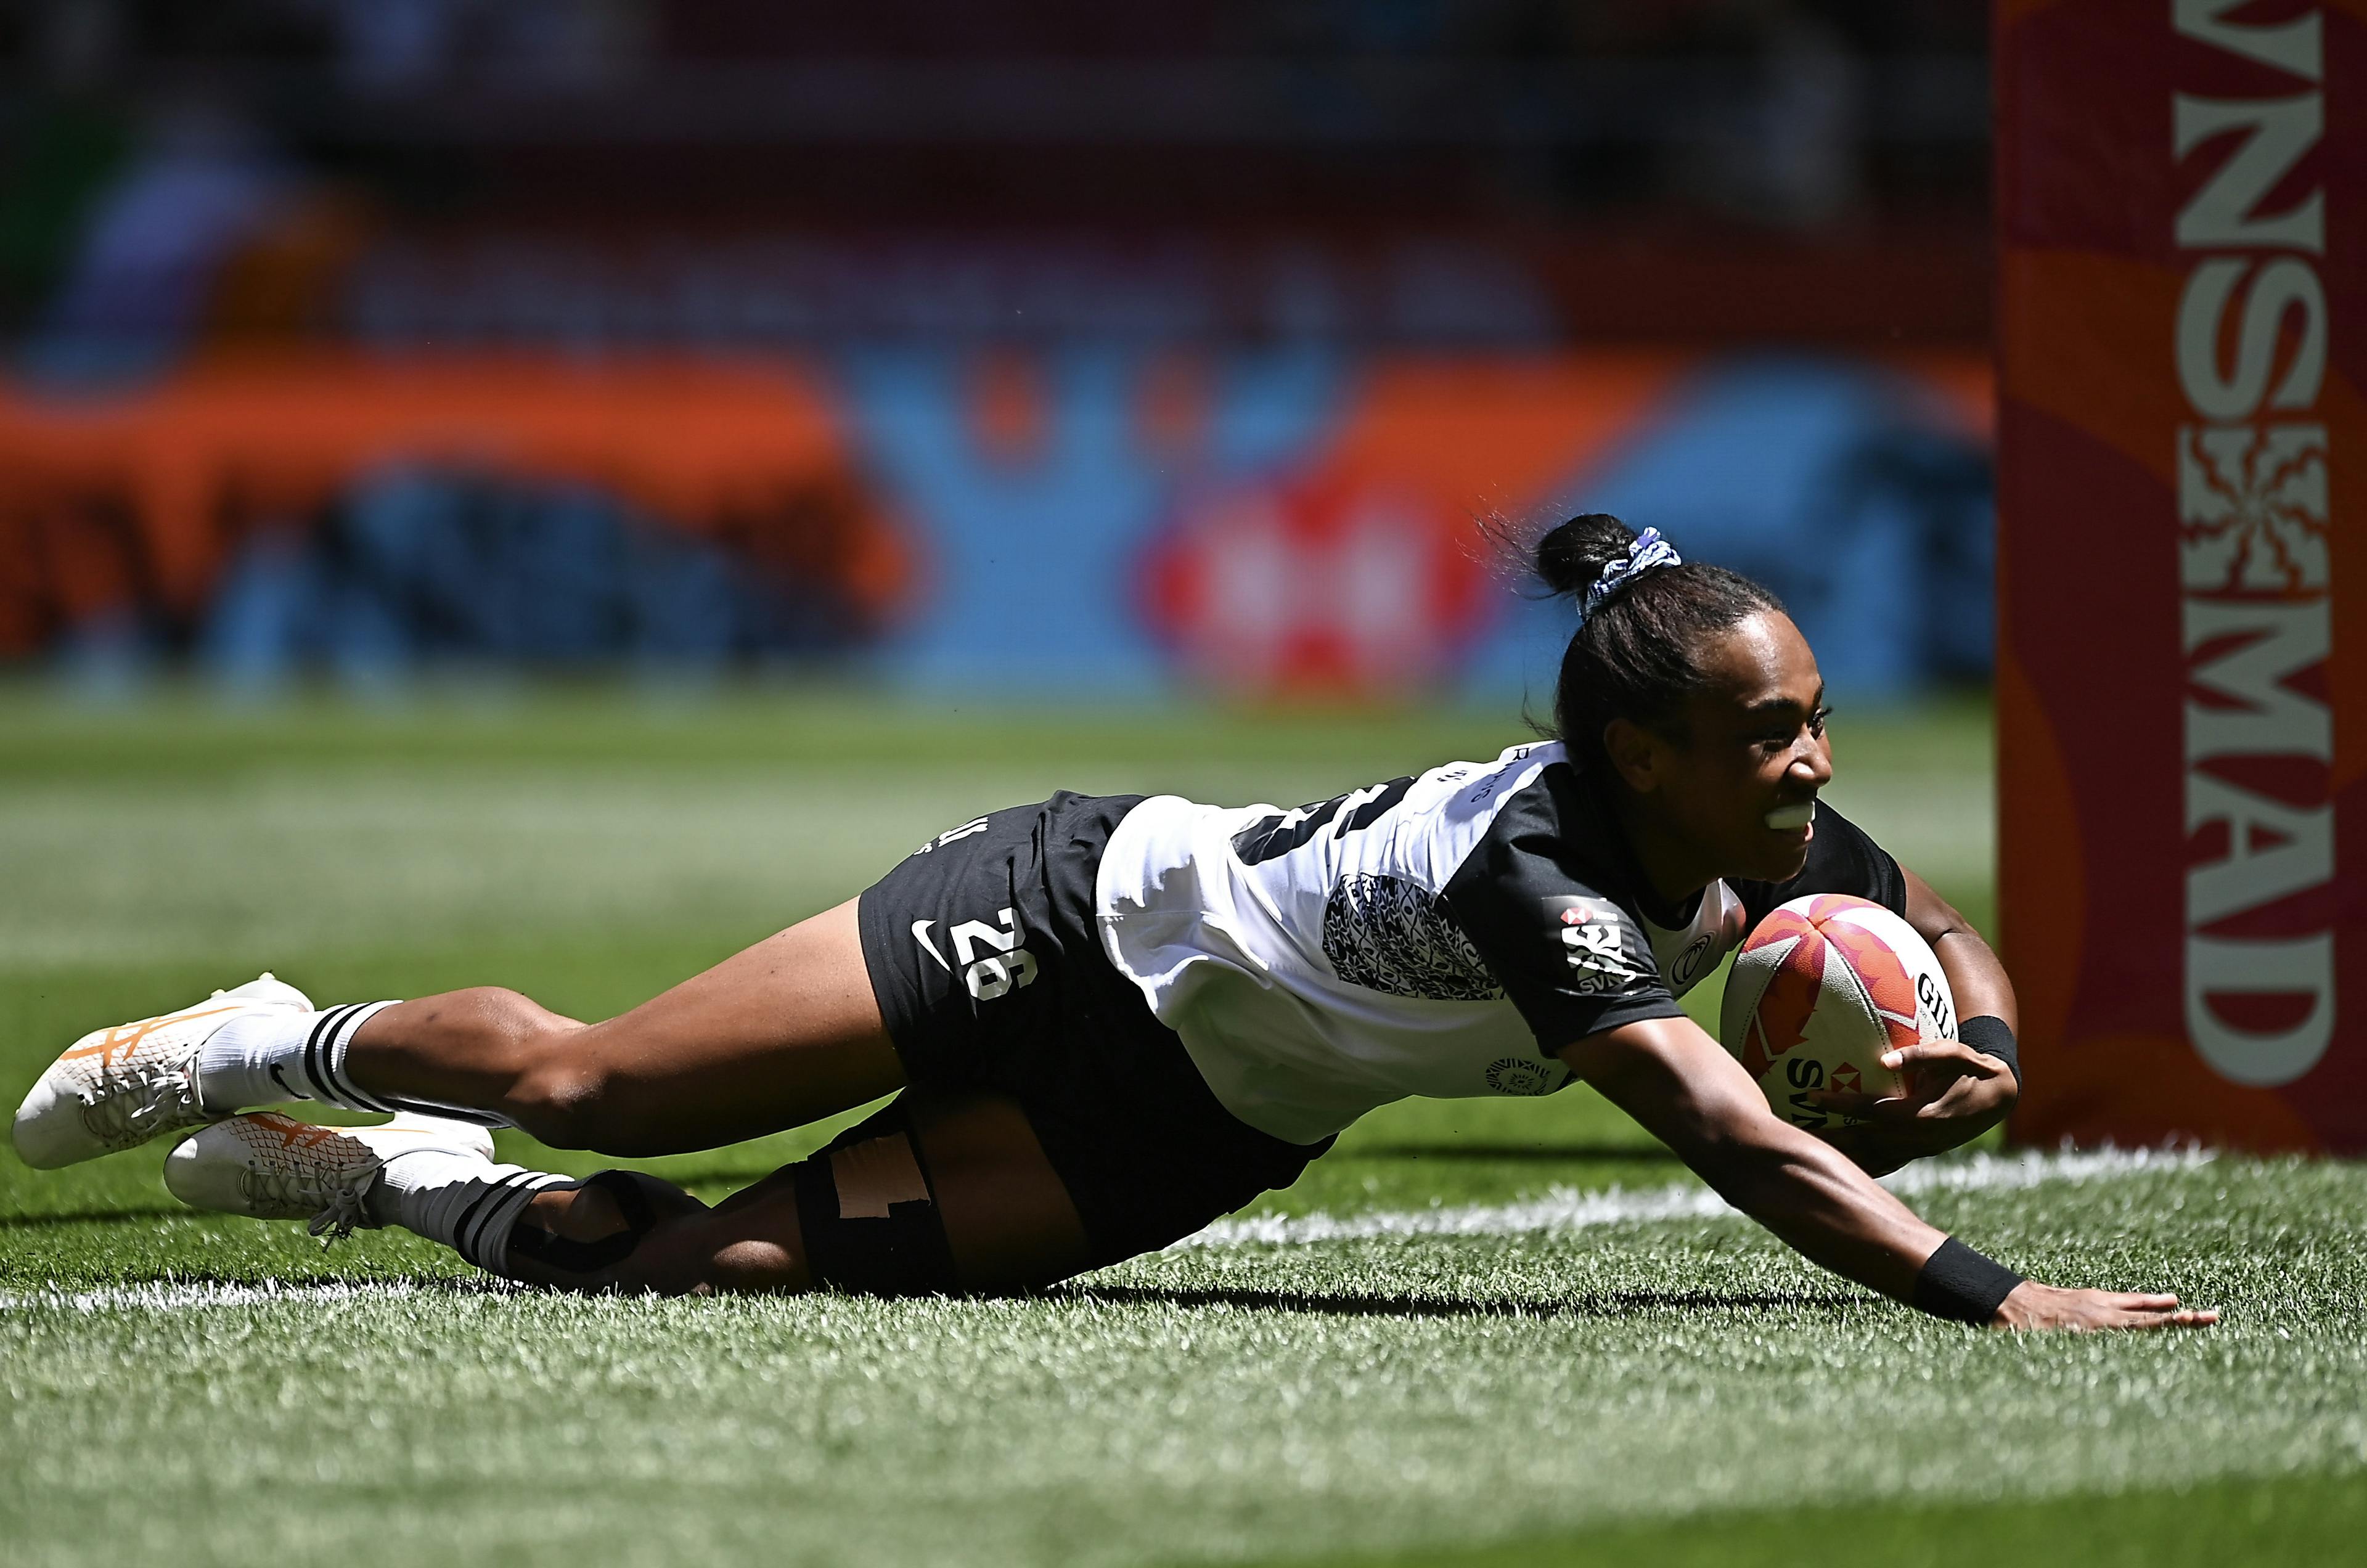 Kolora Lomani for Fiji Women's 7's taking part in the Madrid Rugby Sevens.